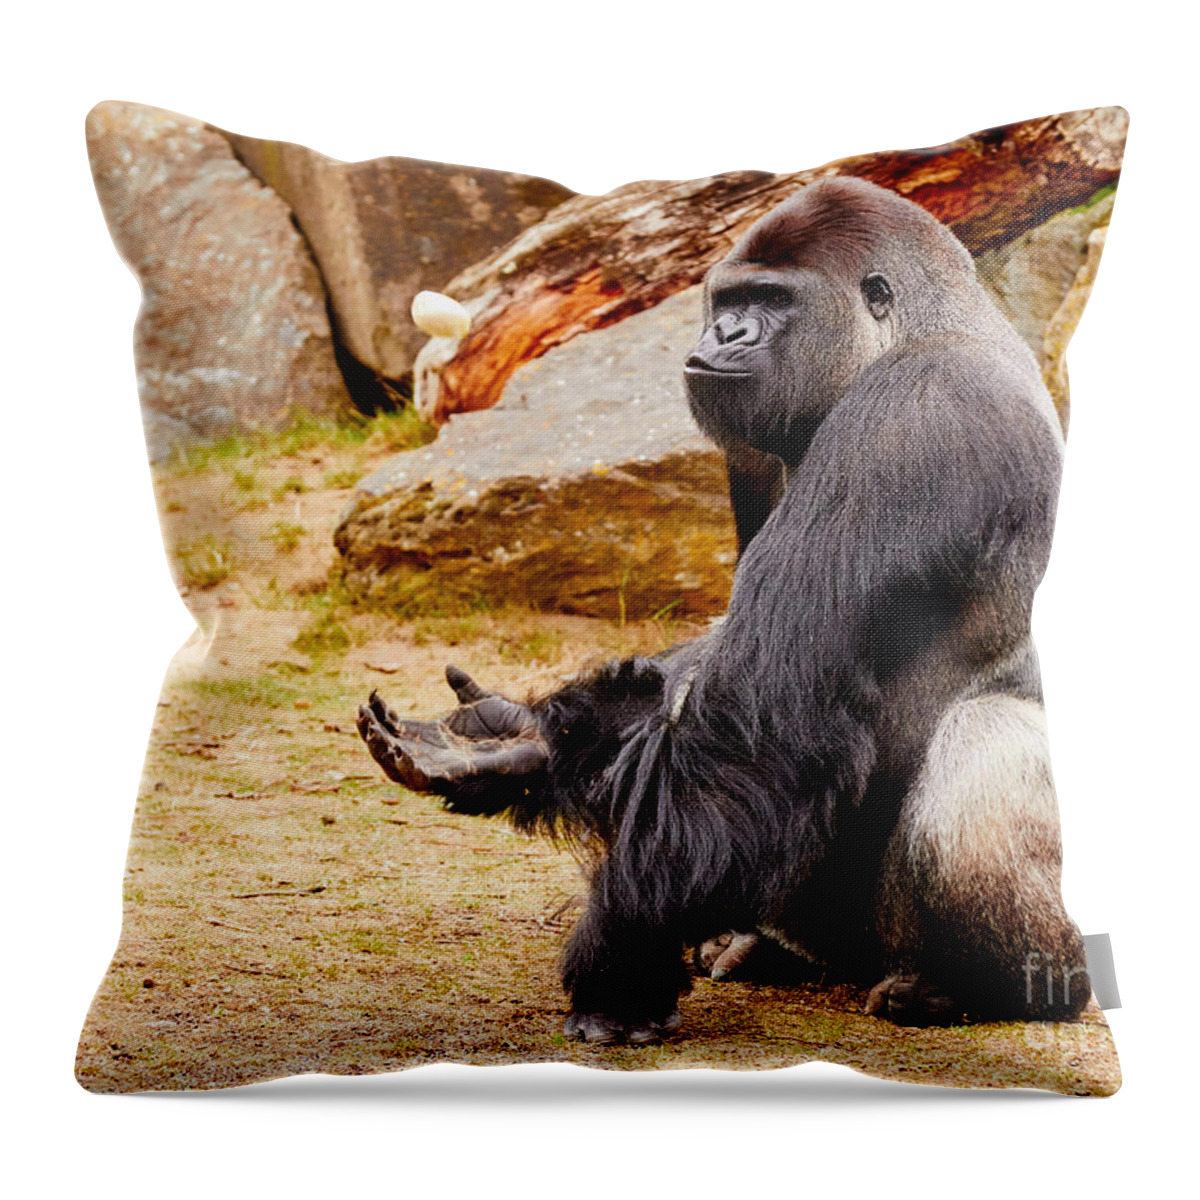 Gorilla Throw Pillow featuring the photograph Gorilla sitting upright holding his hand up by Nick Biemans